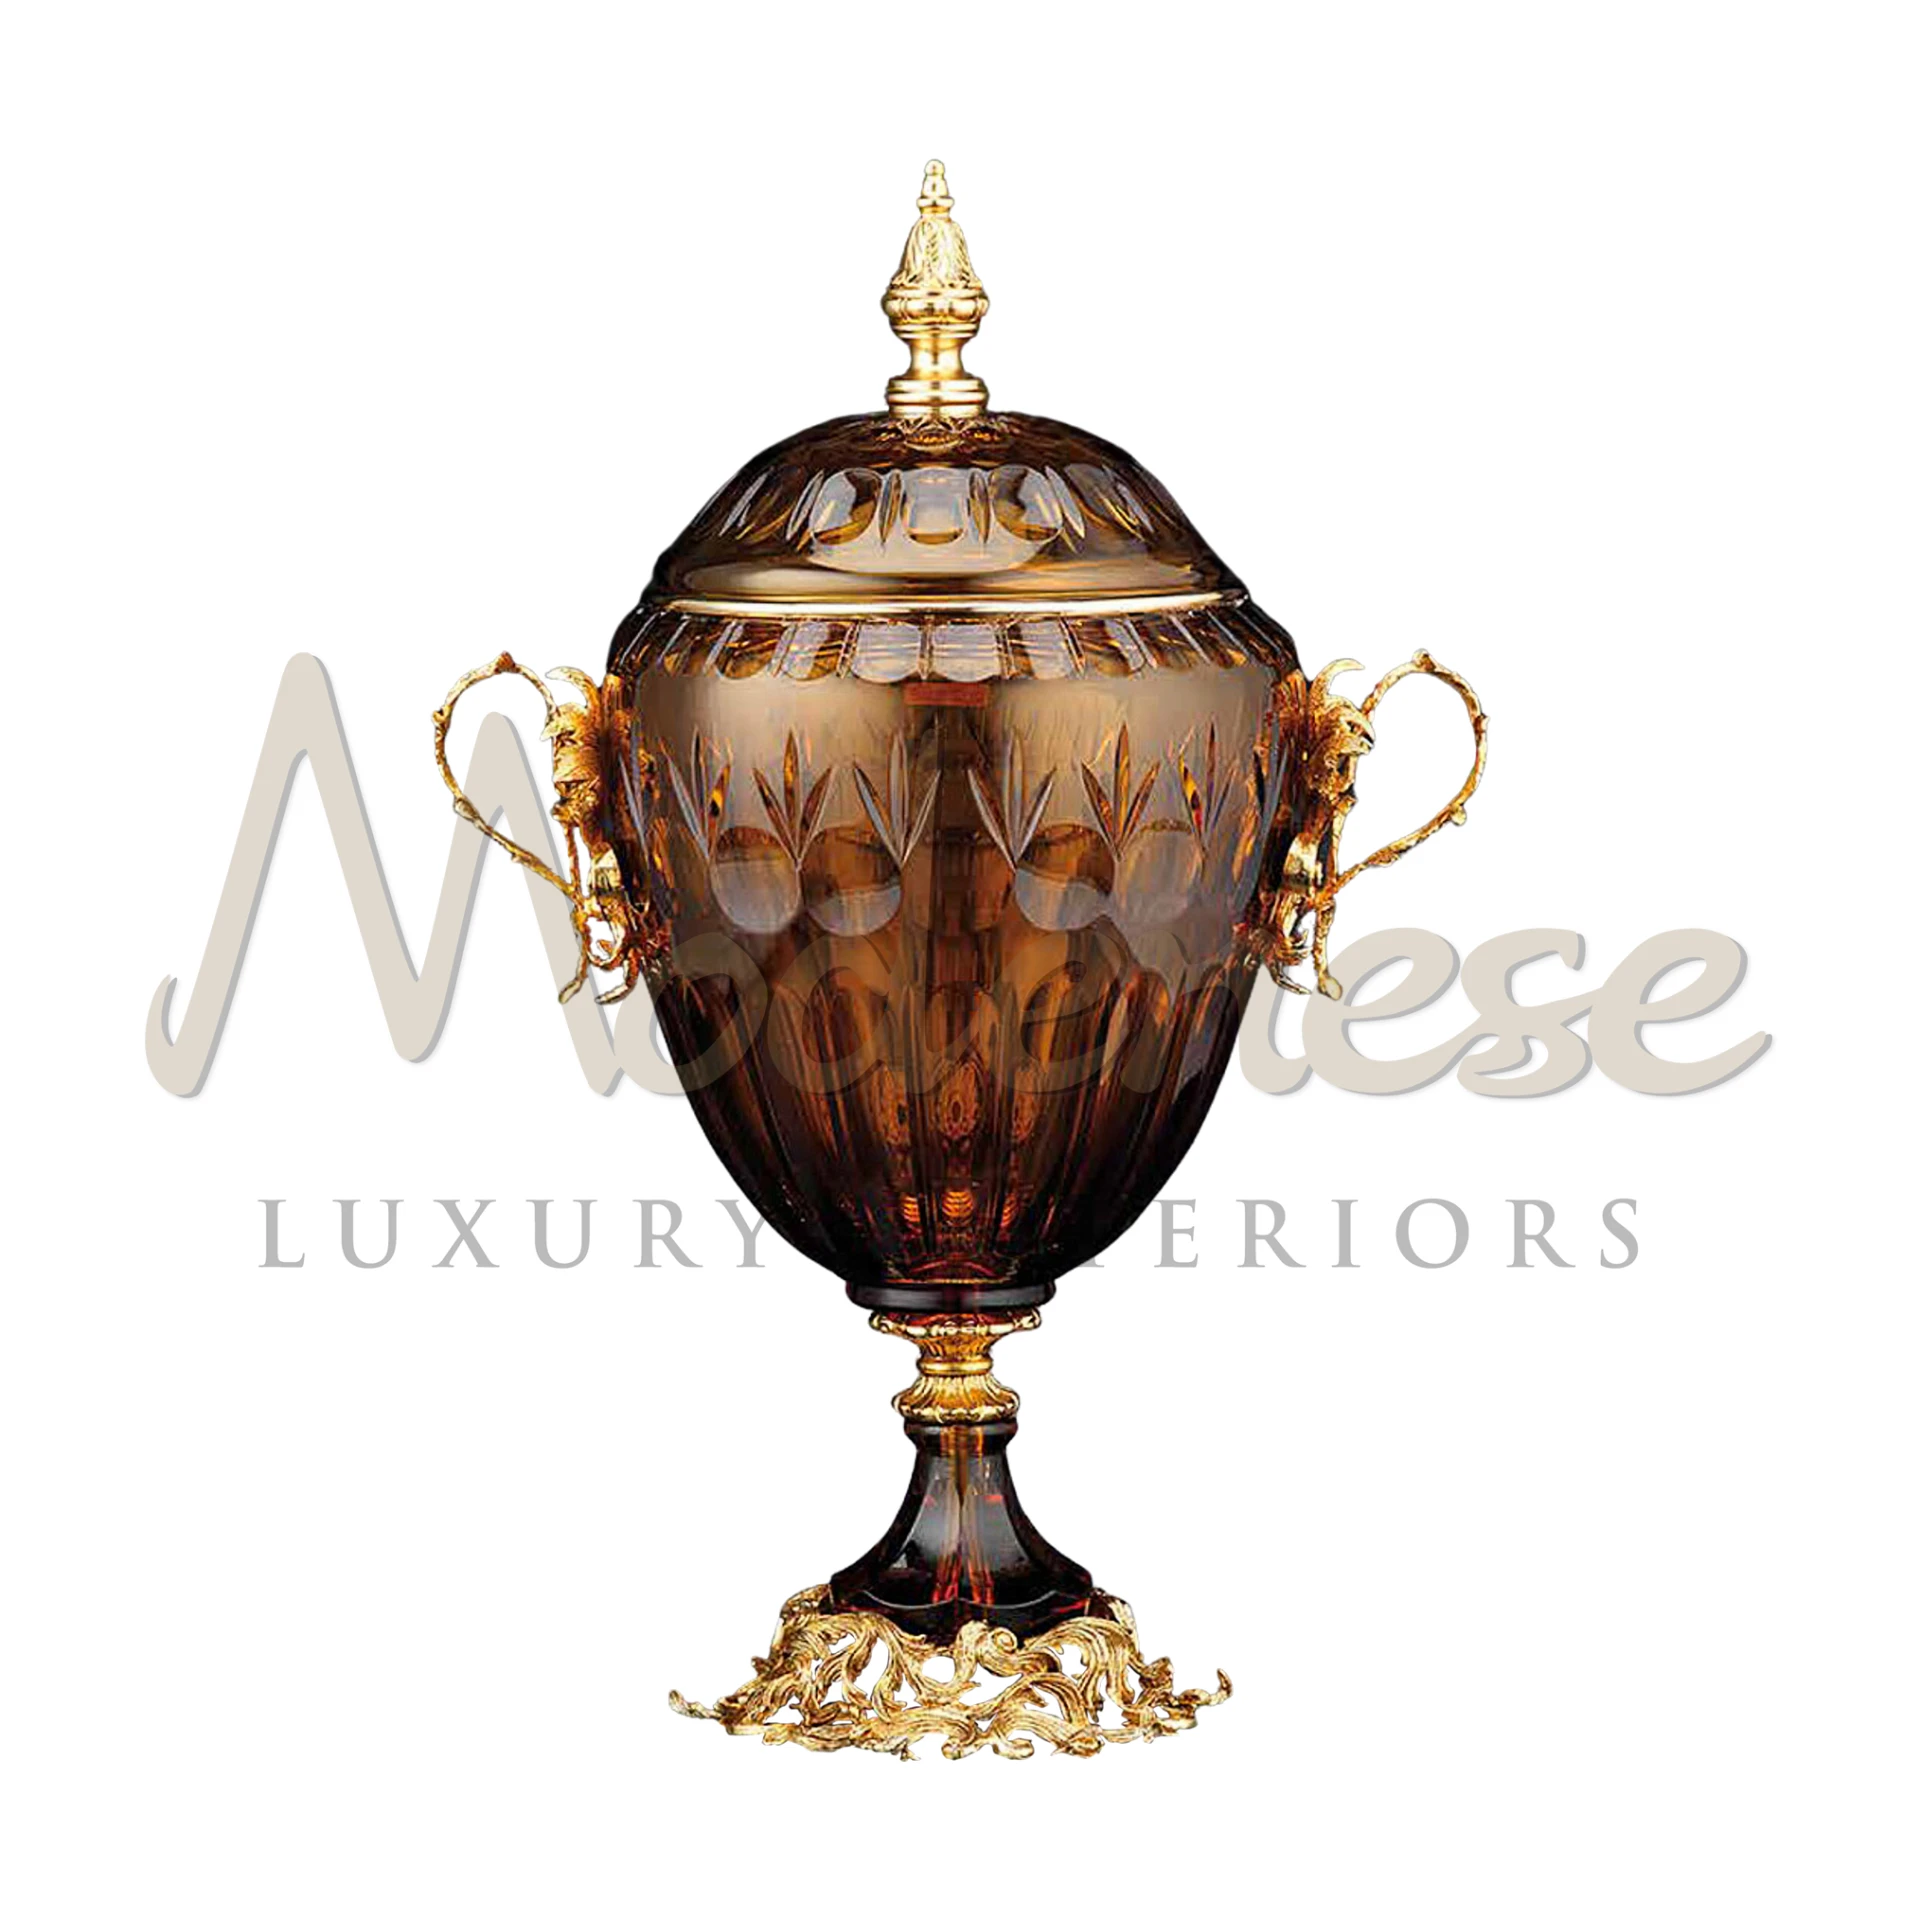 Royal Luxury Crystal Vase, adorned with precious metals and jewels, embodies opulence and intricate detailing for high-end interior design.






